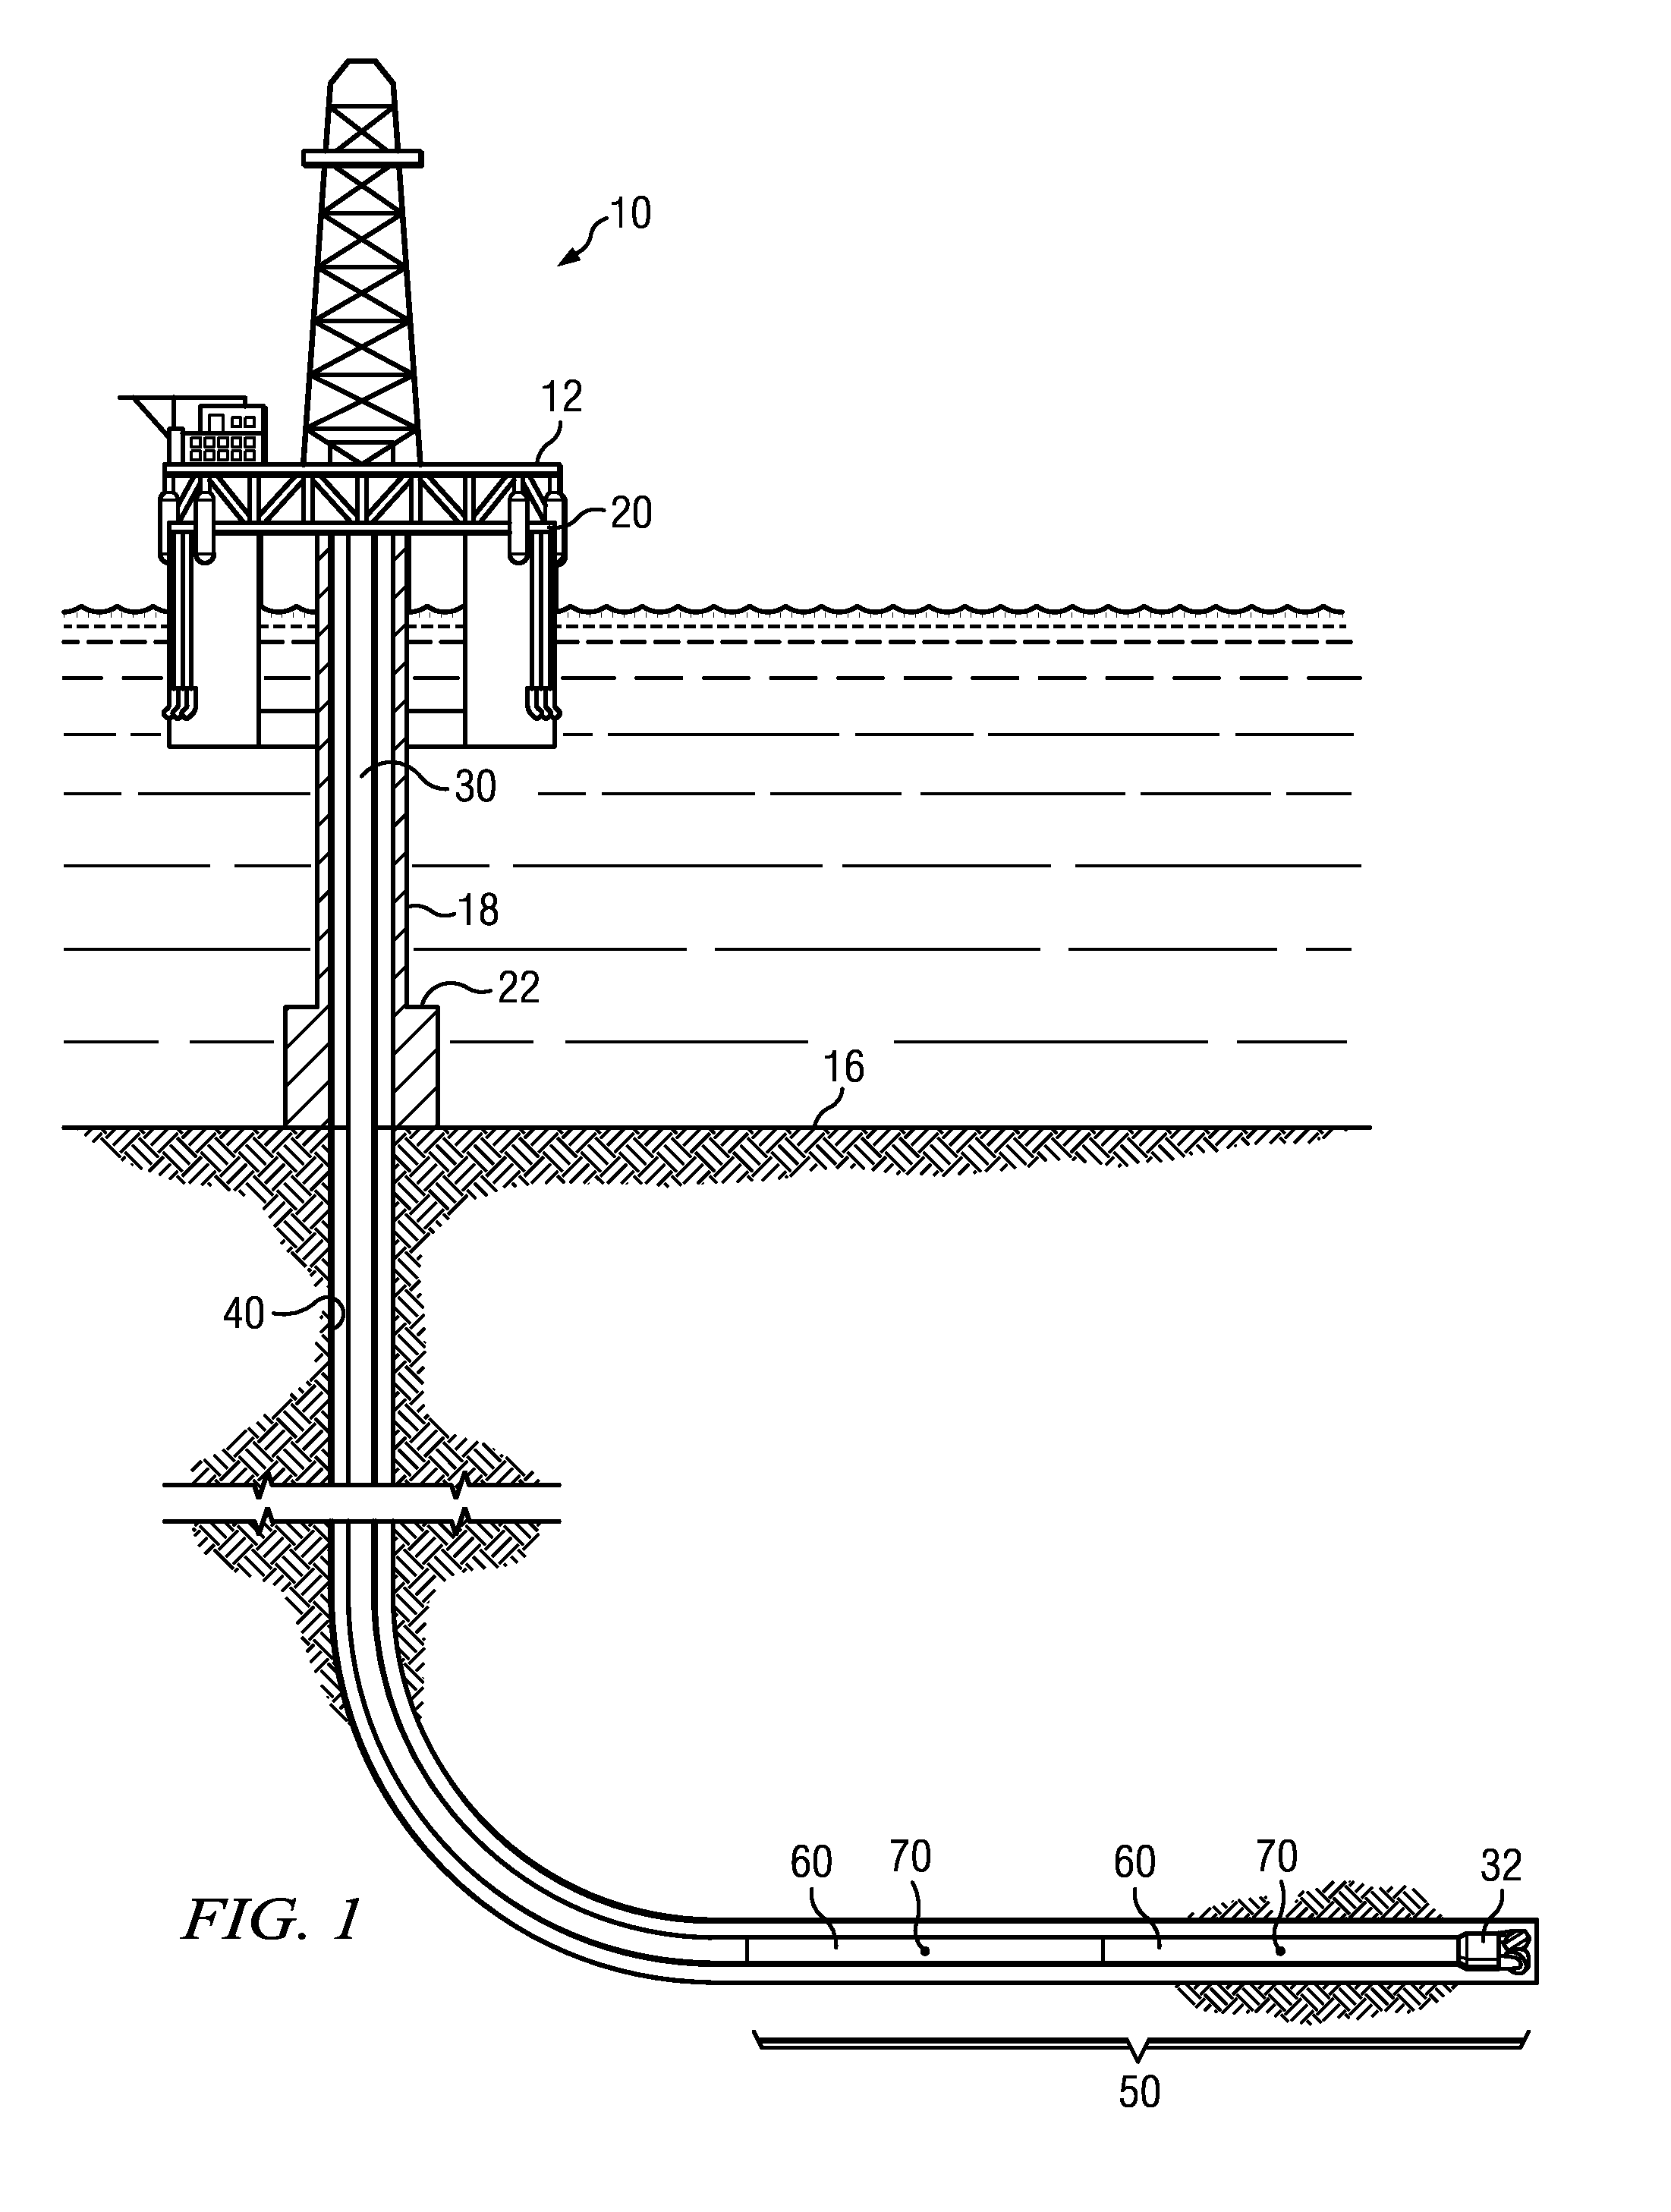 Downhole determination of drilling state